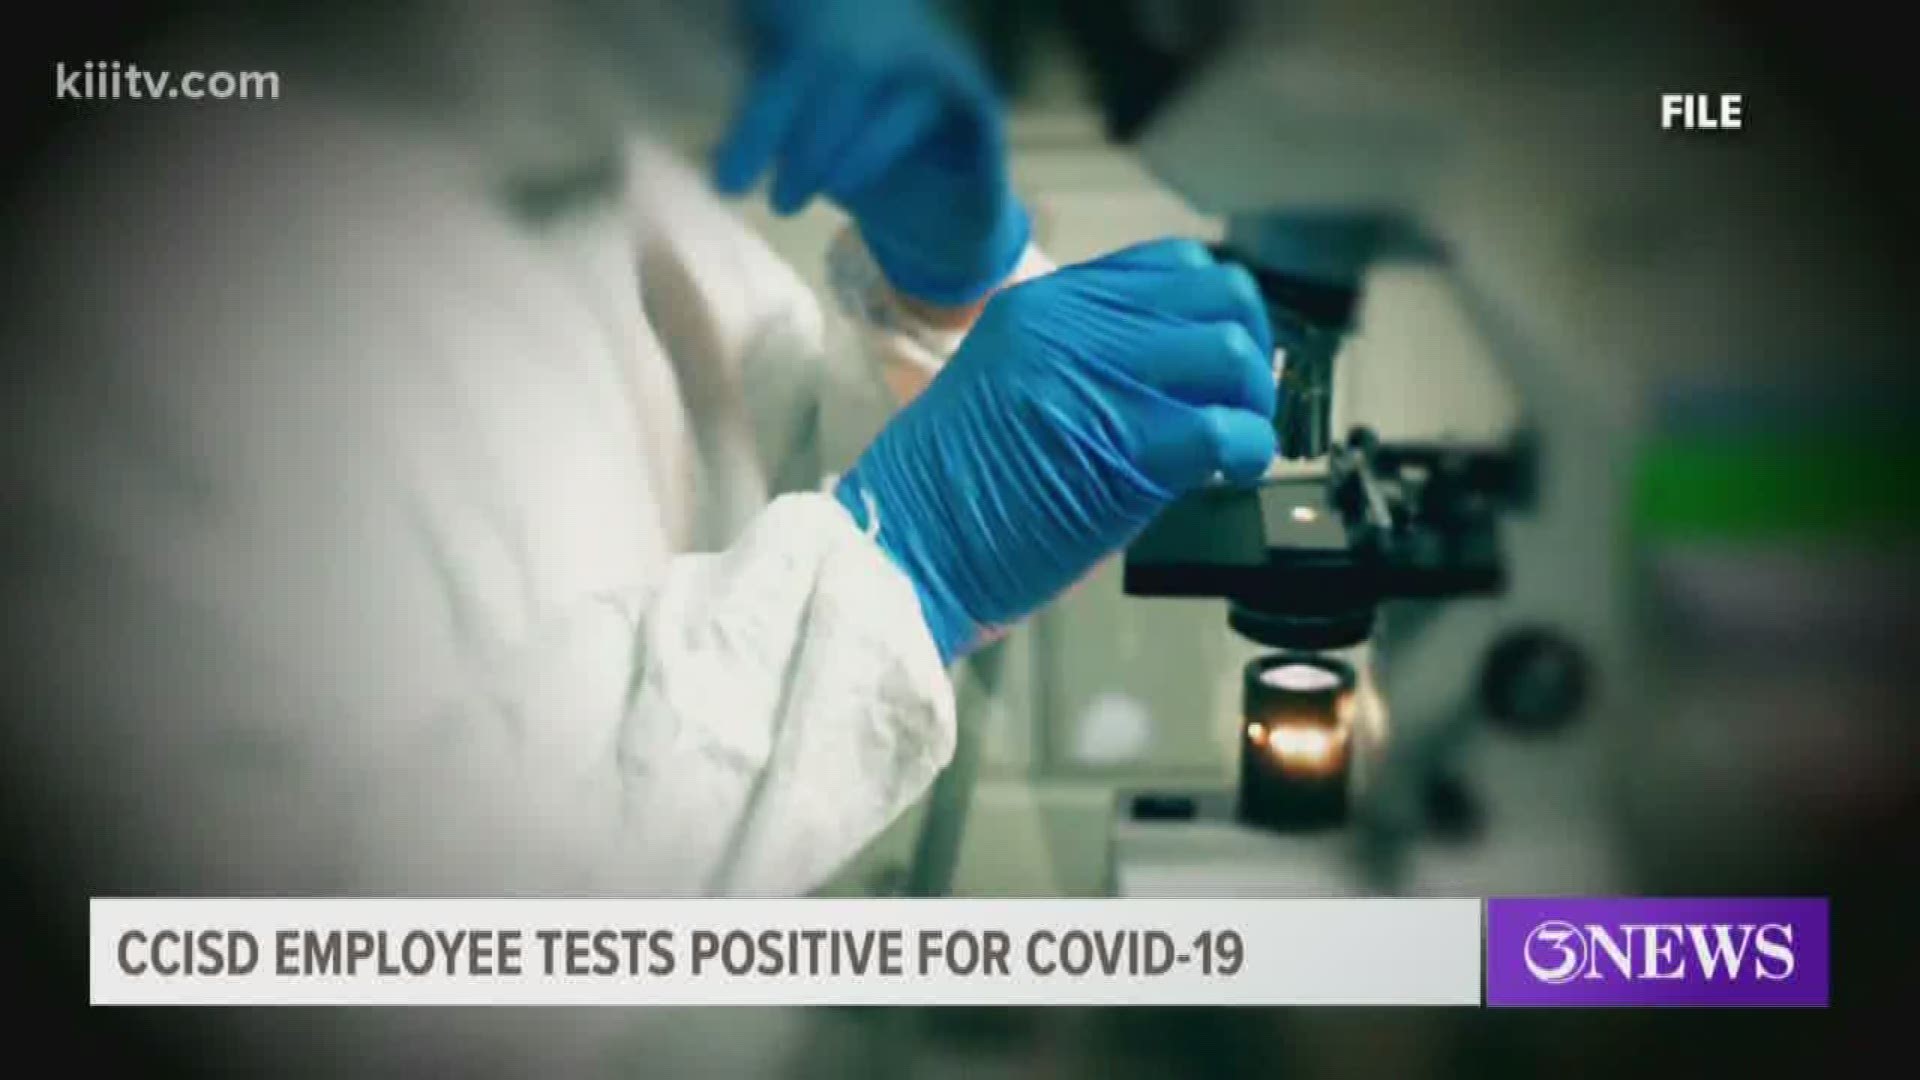 On Tuesday morning, a CCISD employee who was tested for COVID-19 on March 17th received a positive result.